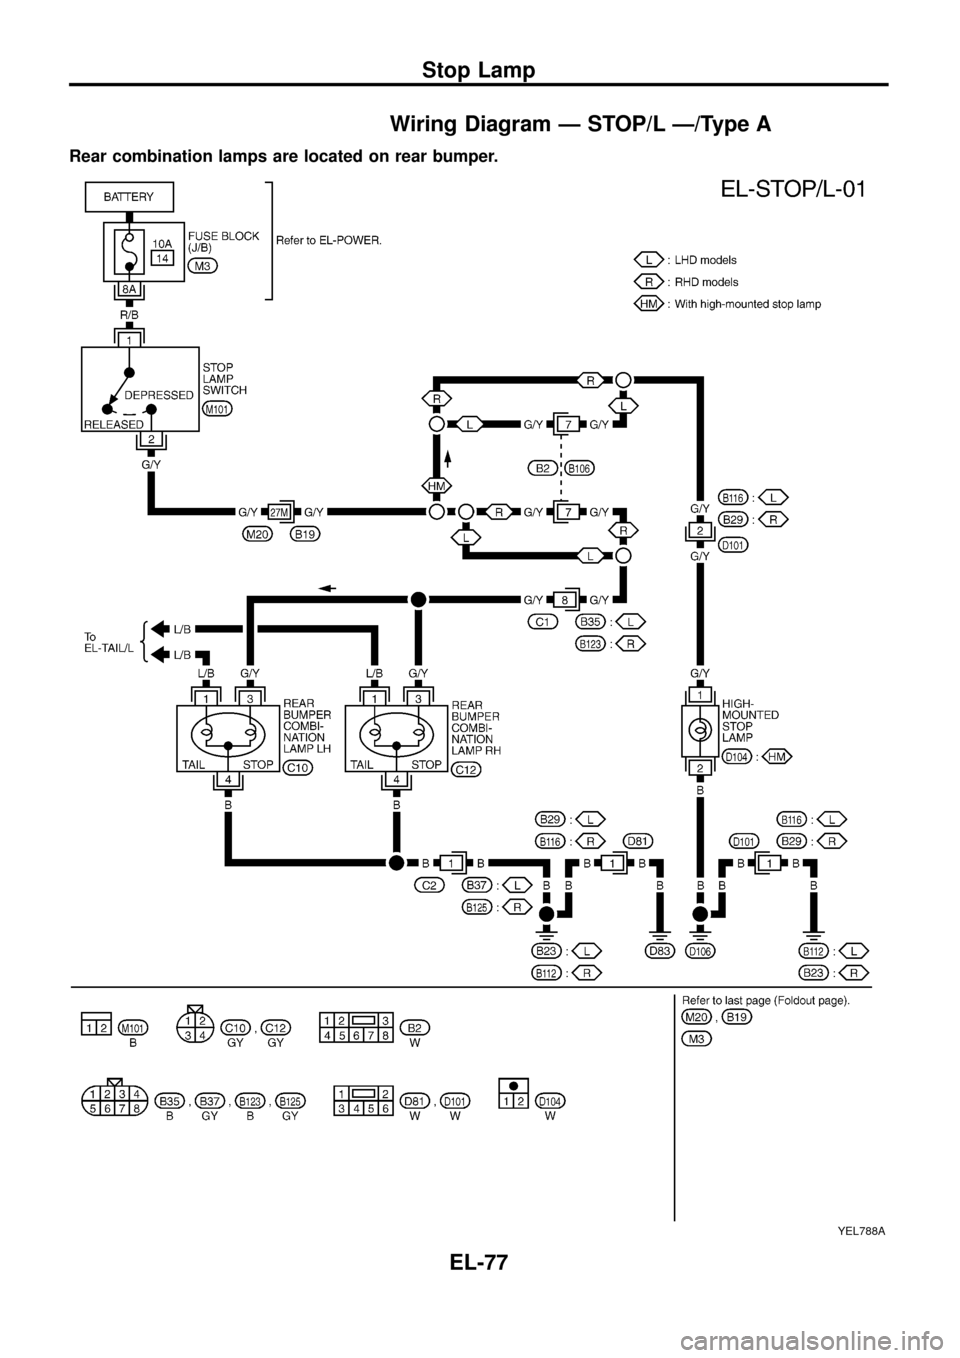 NISSAN PATROL 1998 Y61 / 5.G Electrical System Manual Online Wiring Diagram Ð STOP/L Ð/Type A
Rear combination lamps are located on rear bumper.
YEL788A
Stop Lamp
EL-77 